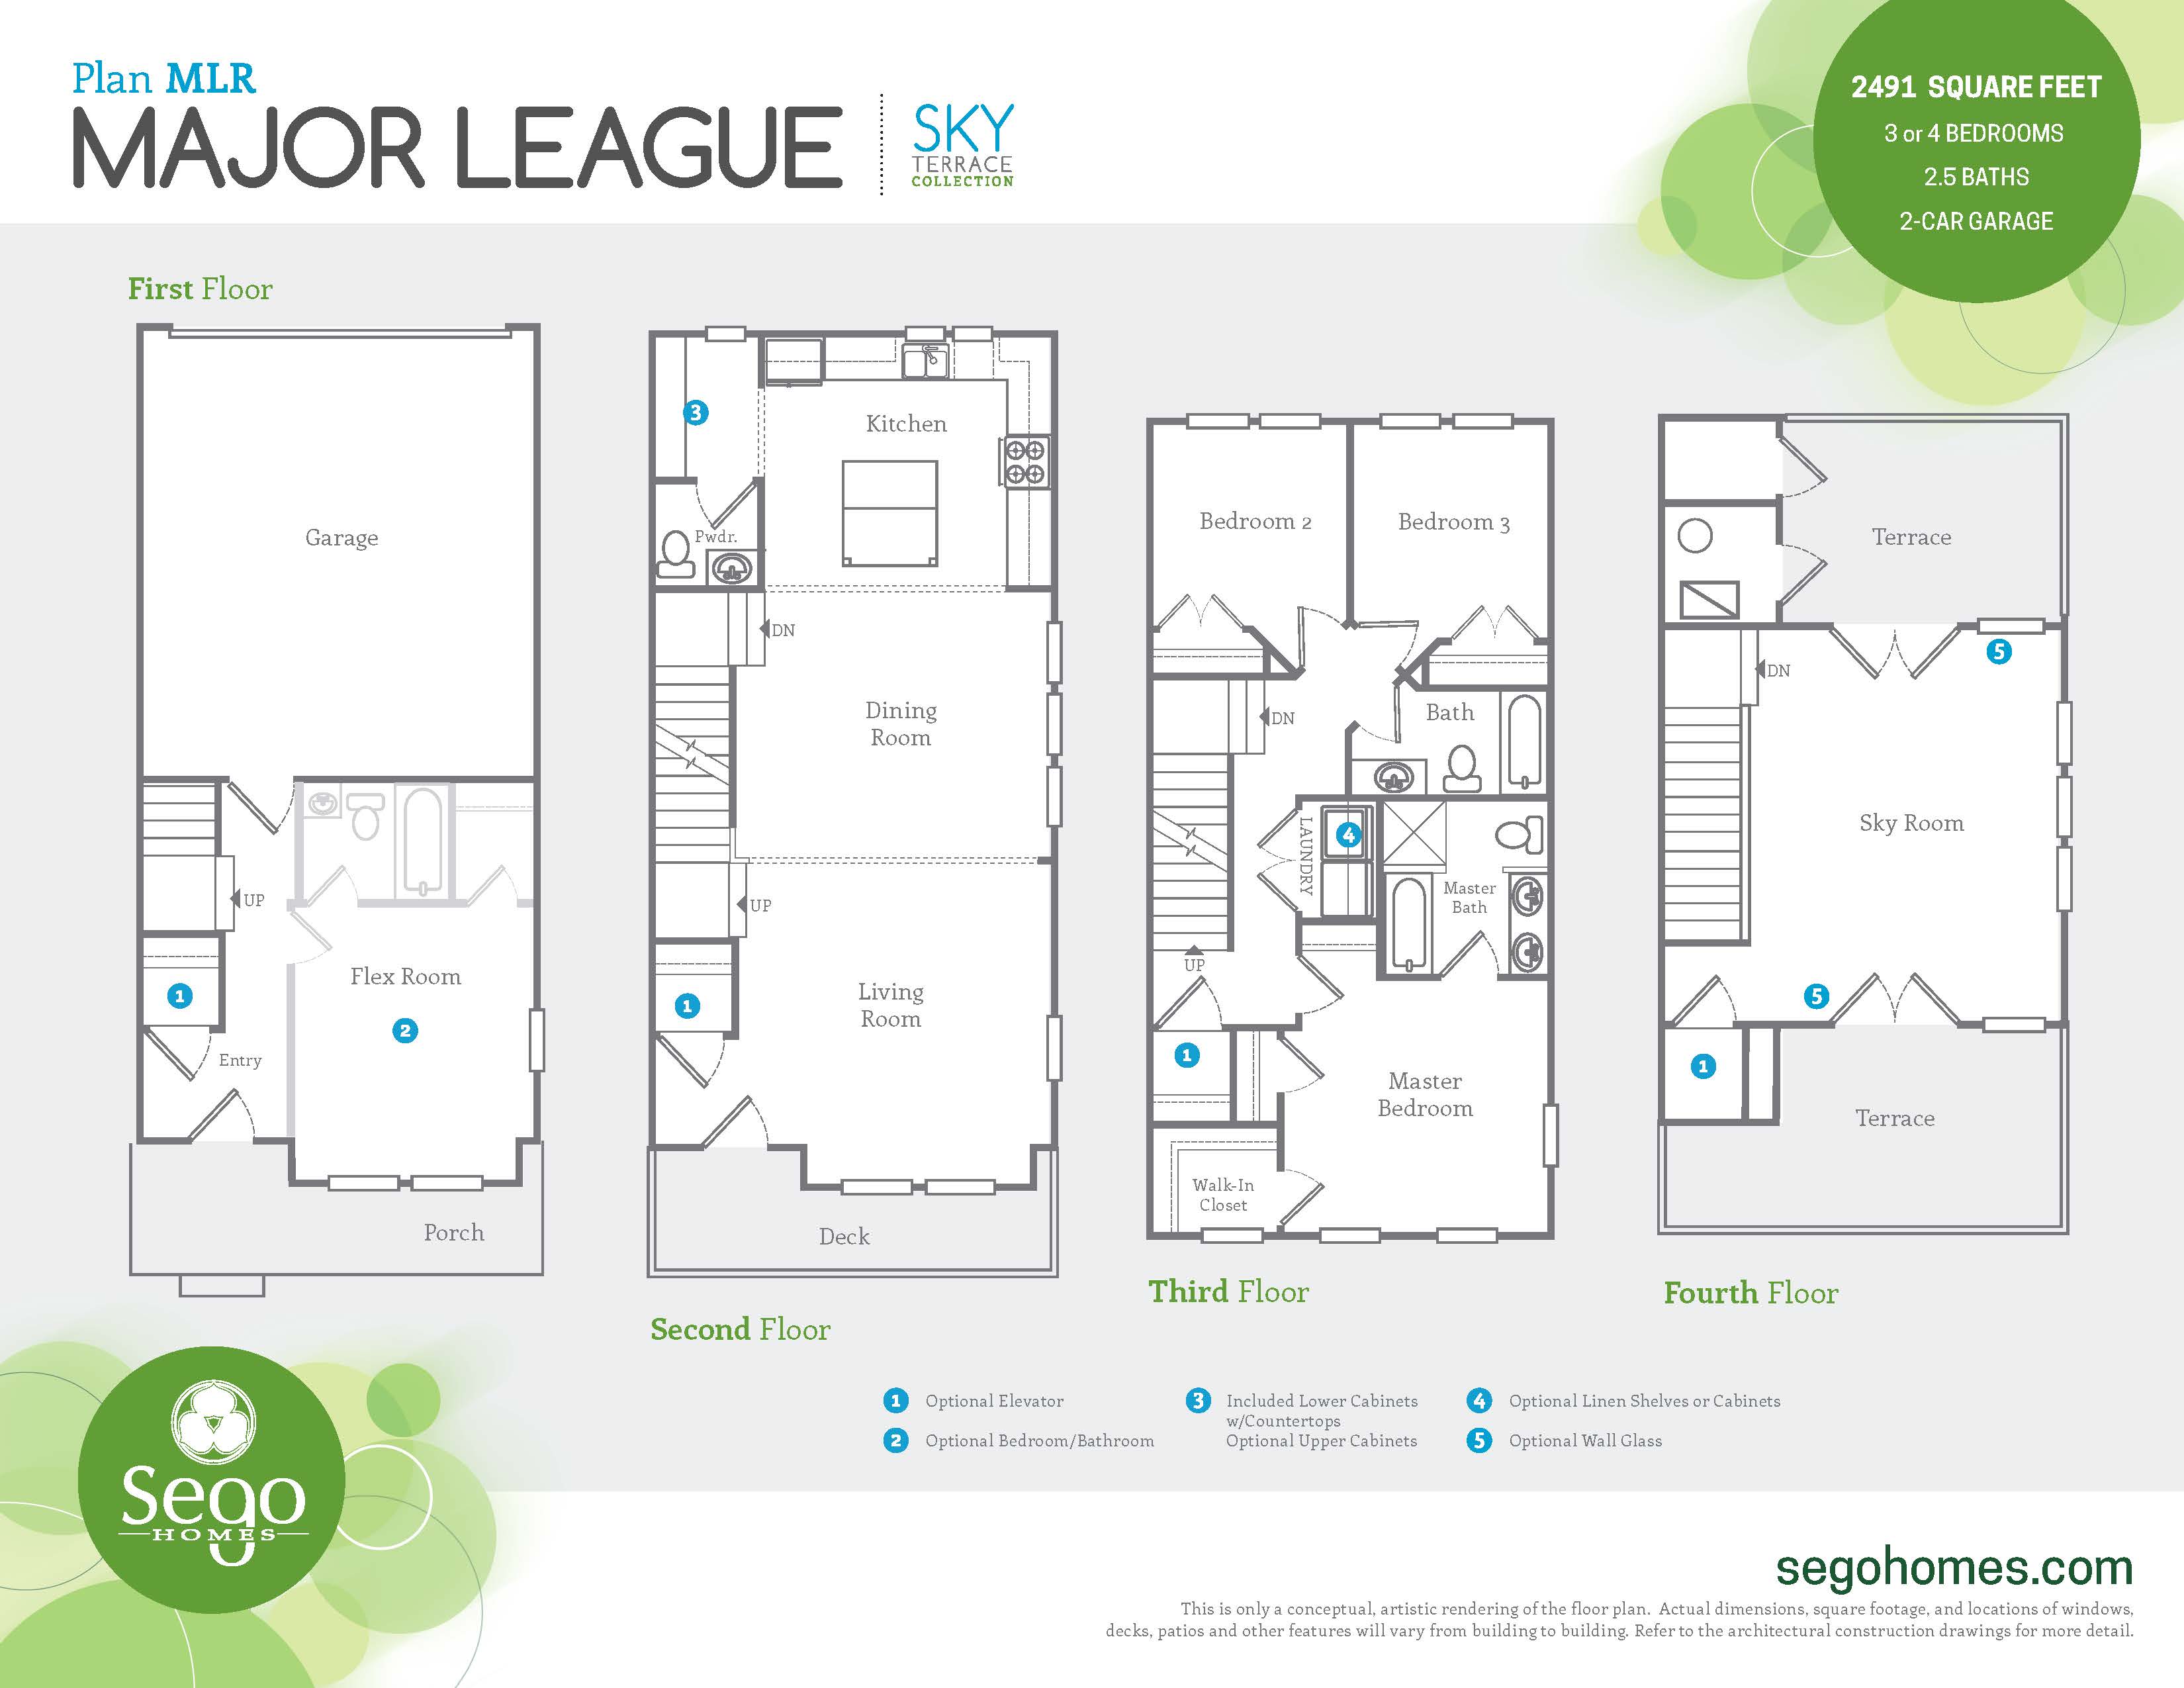 Floorplan handout of the Major League with Roof Deck